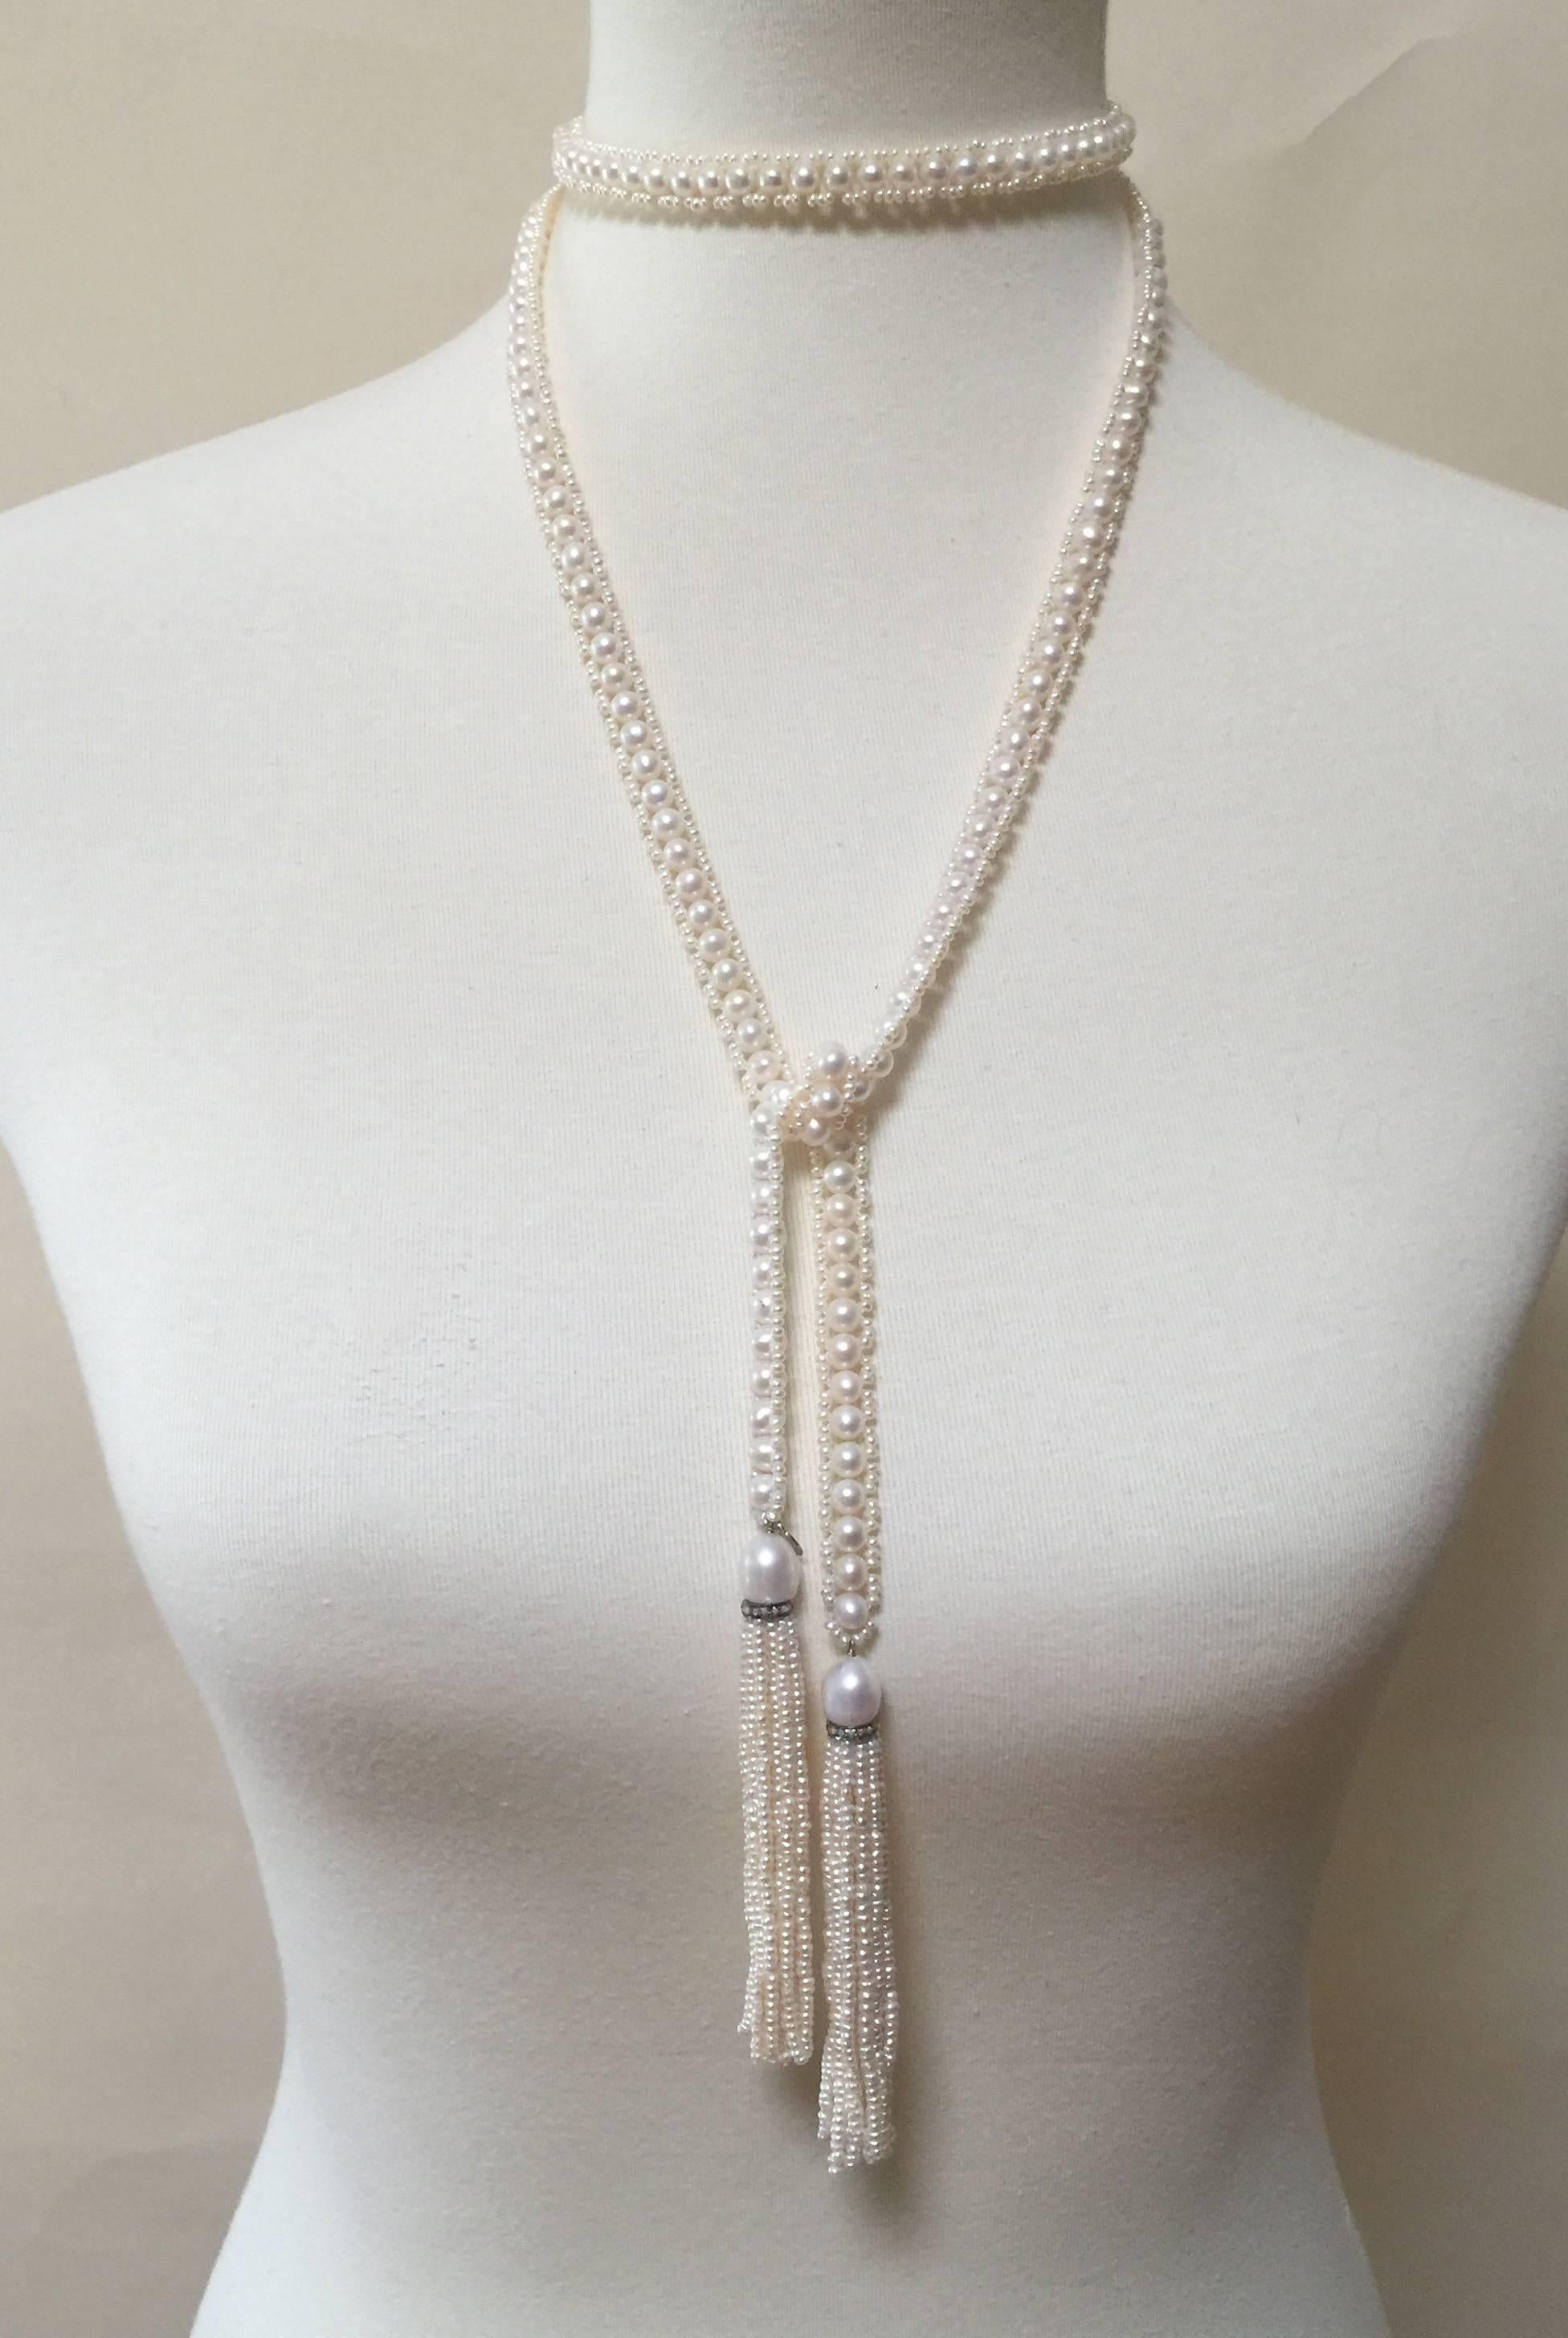 Artist Marina J intricately Woven Pearl Sautoir with Pearl Tassels  Diamond rondales  For Sale